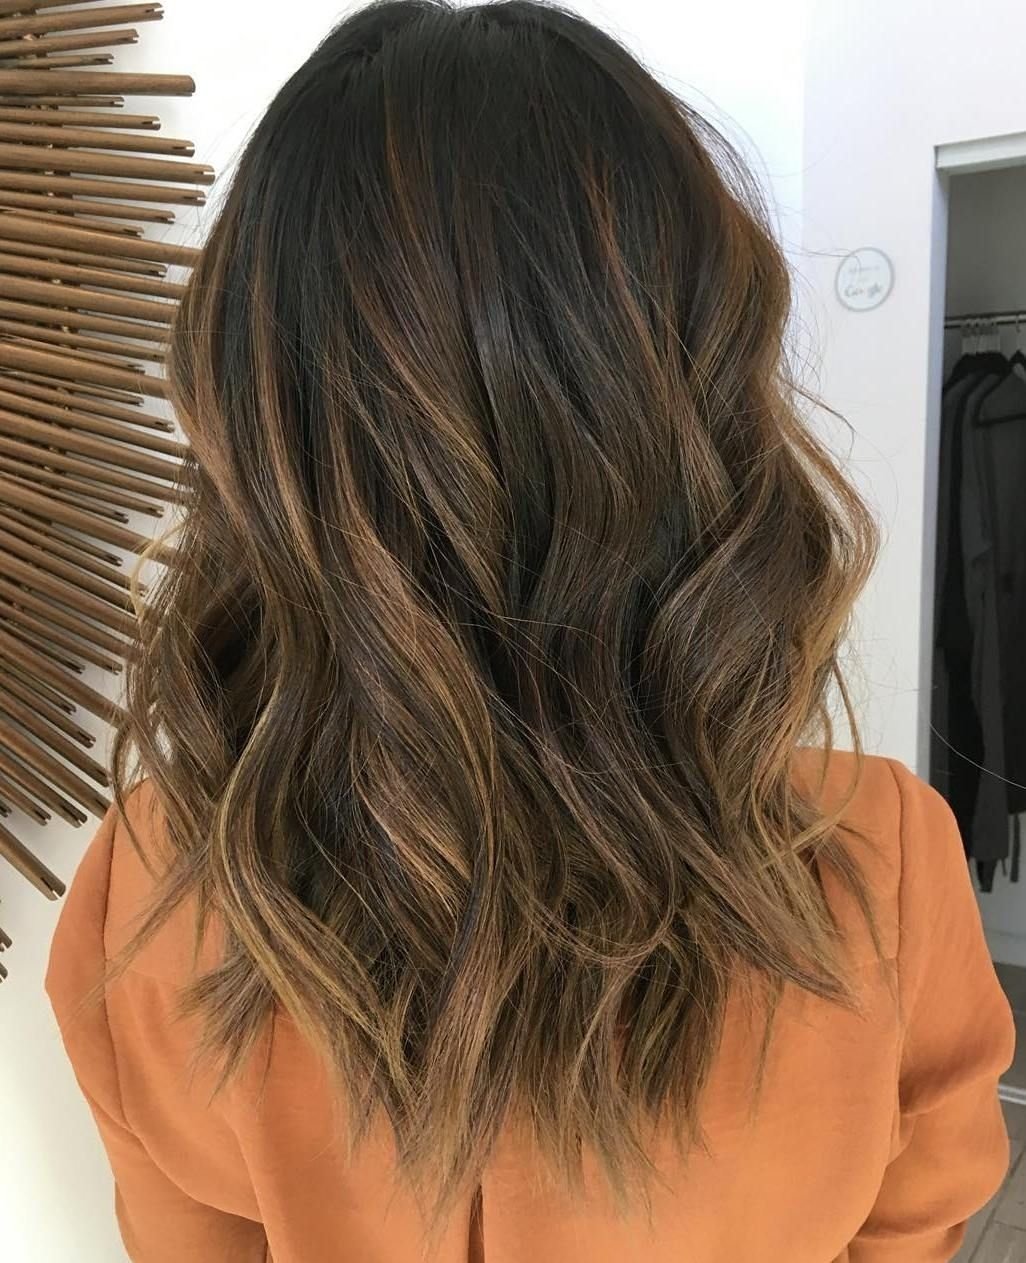 10 Perfect Highlights For Brown Hair Ideas 60 balayage hair color ideas with blonde brown caramel and red 3 2022